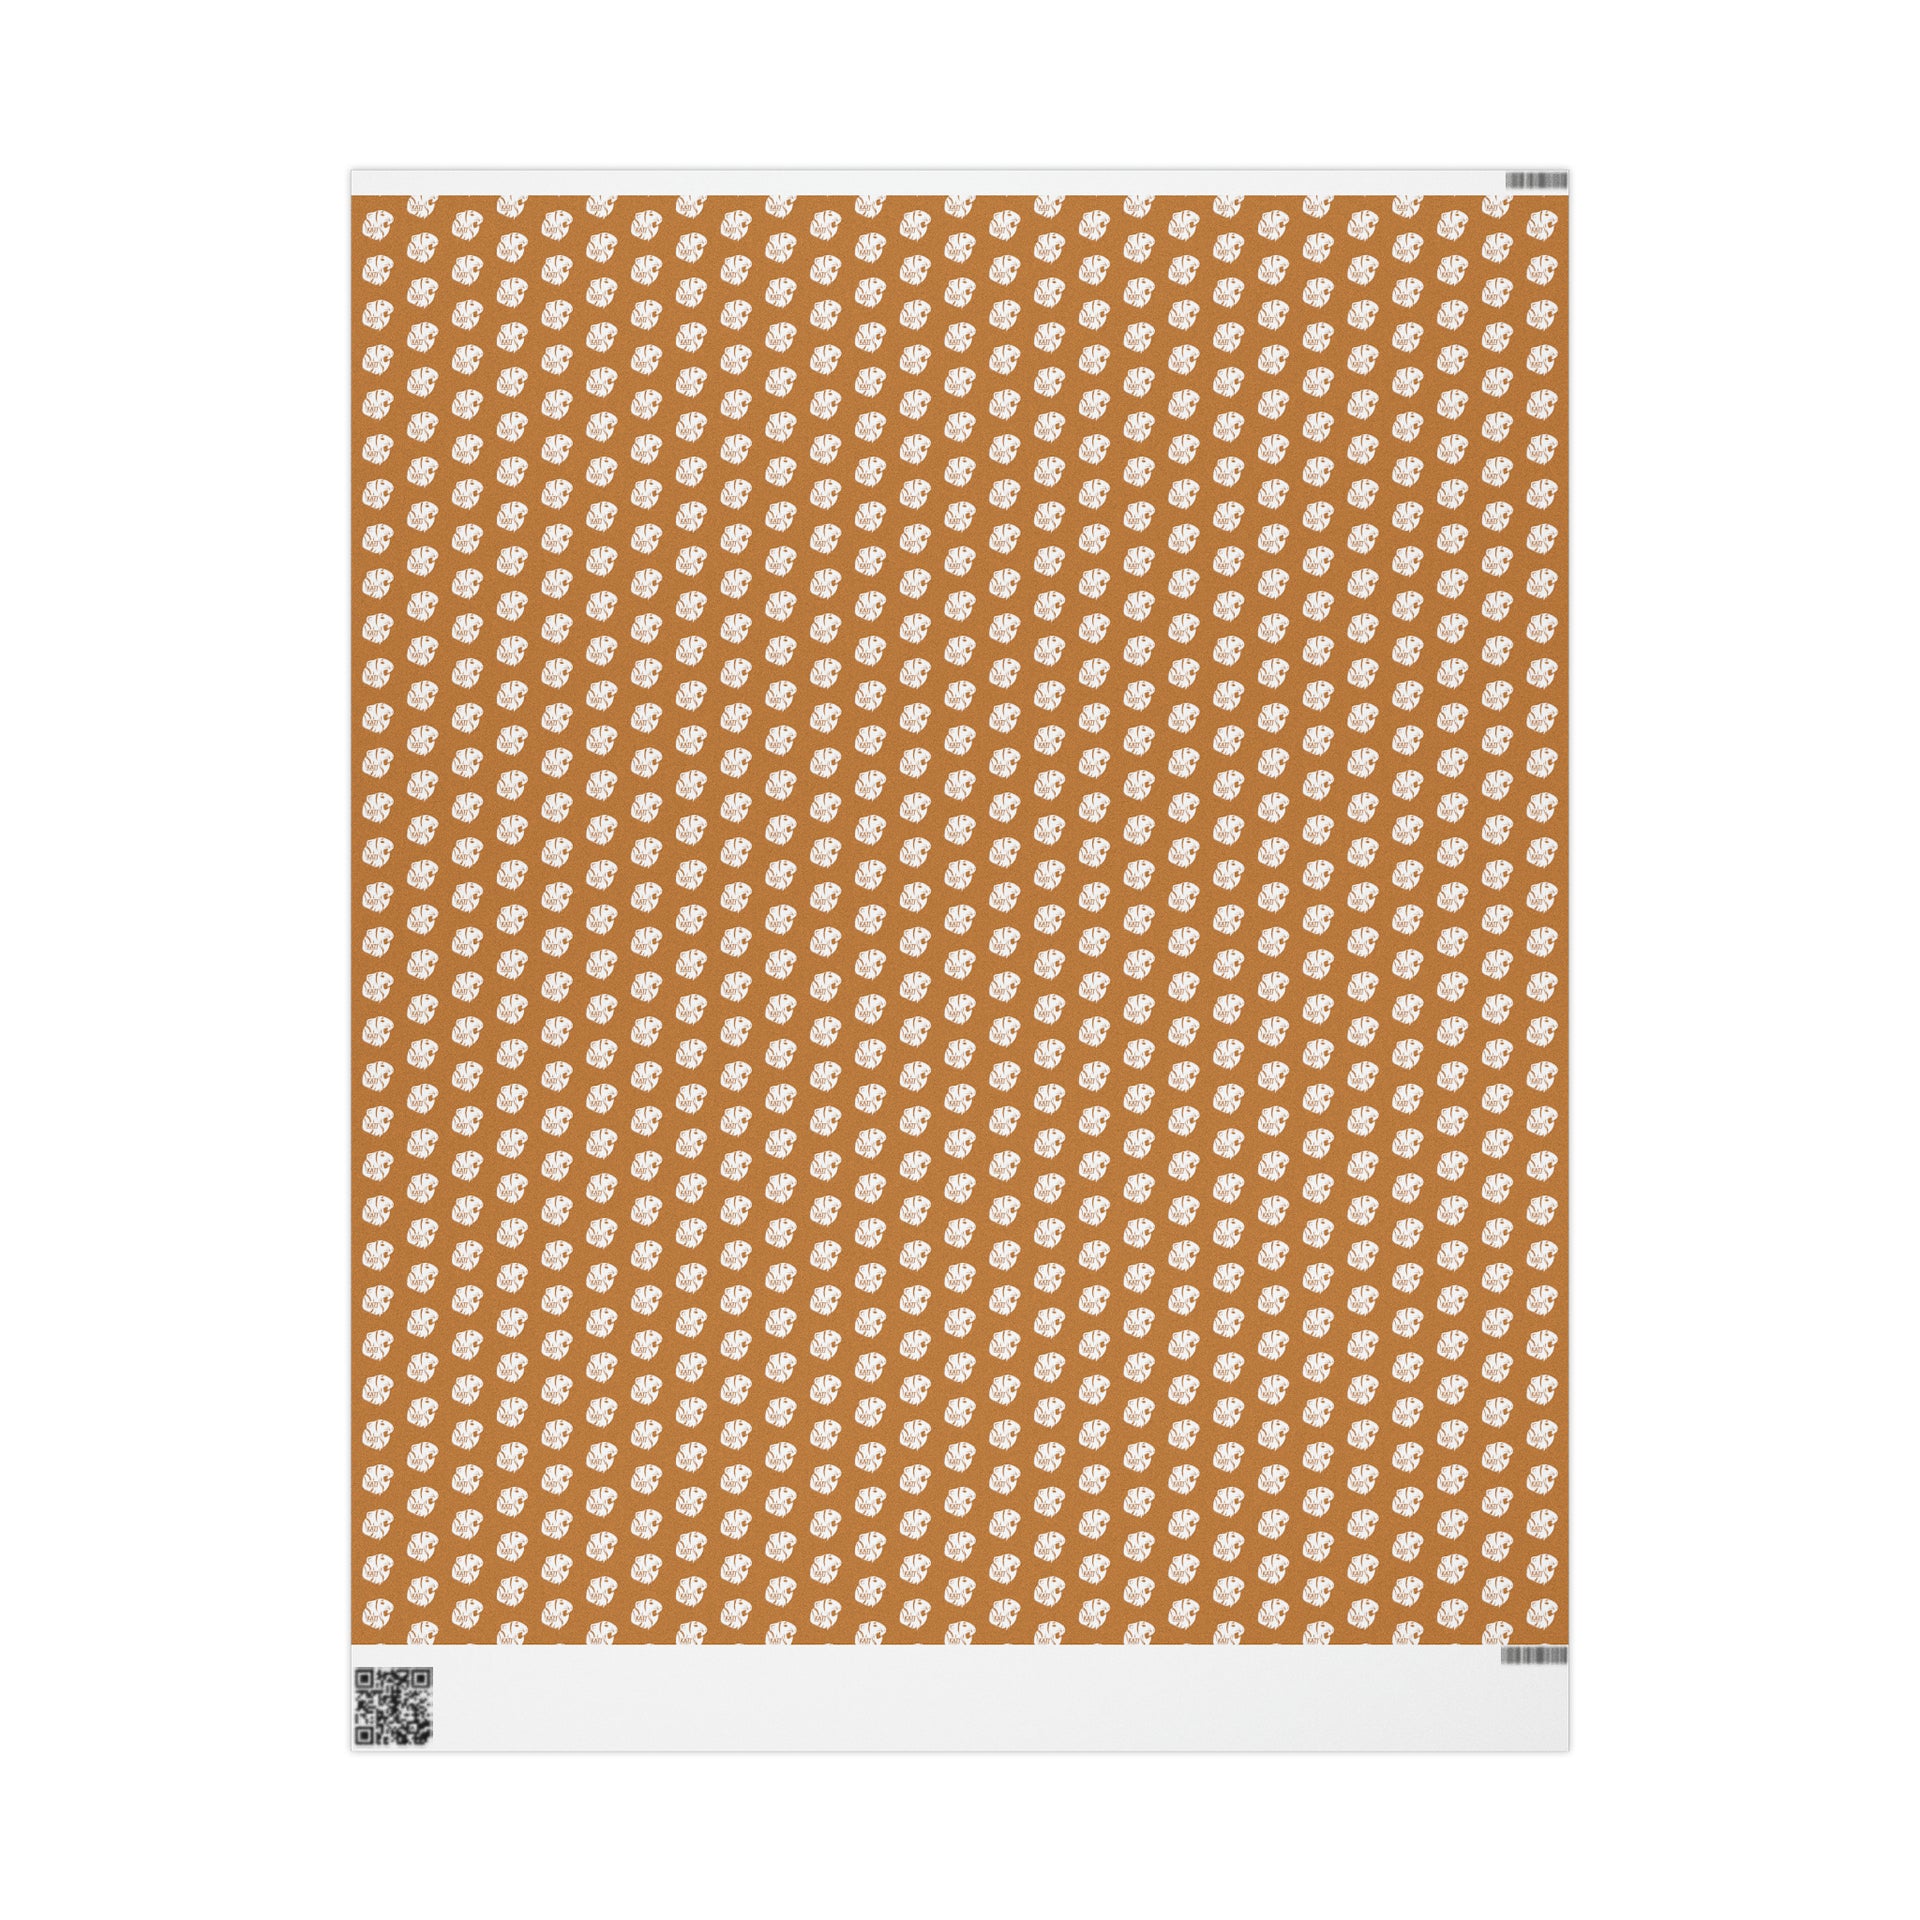 KHS - White Logo on Light Brown Wrapping Paper, 30x36 Roll, Matte Fini –